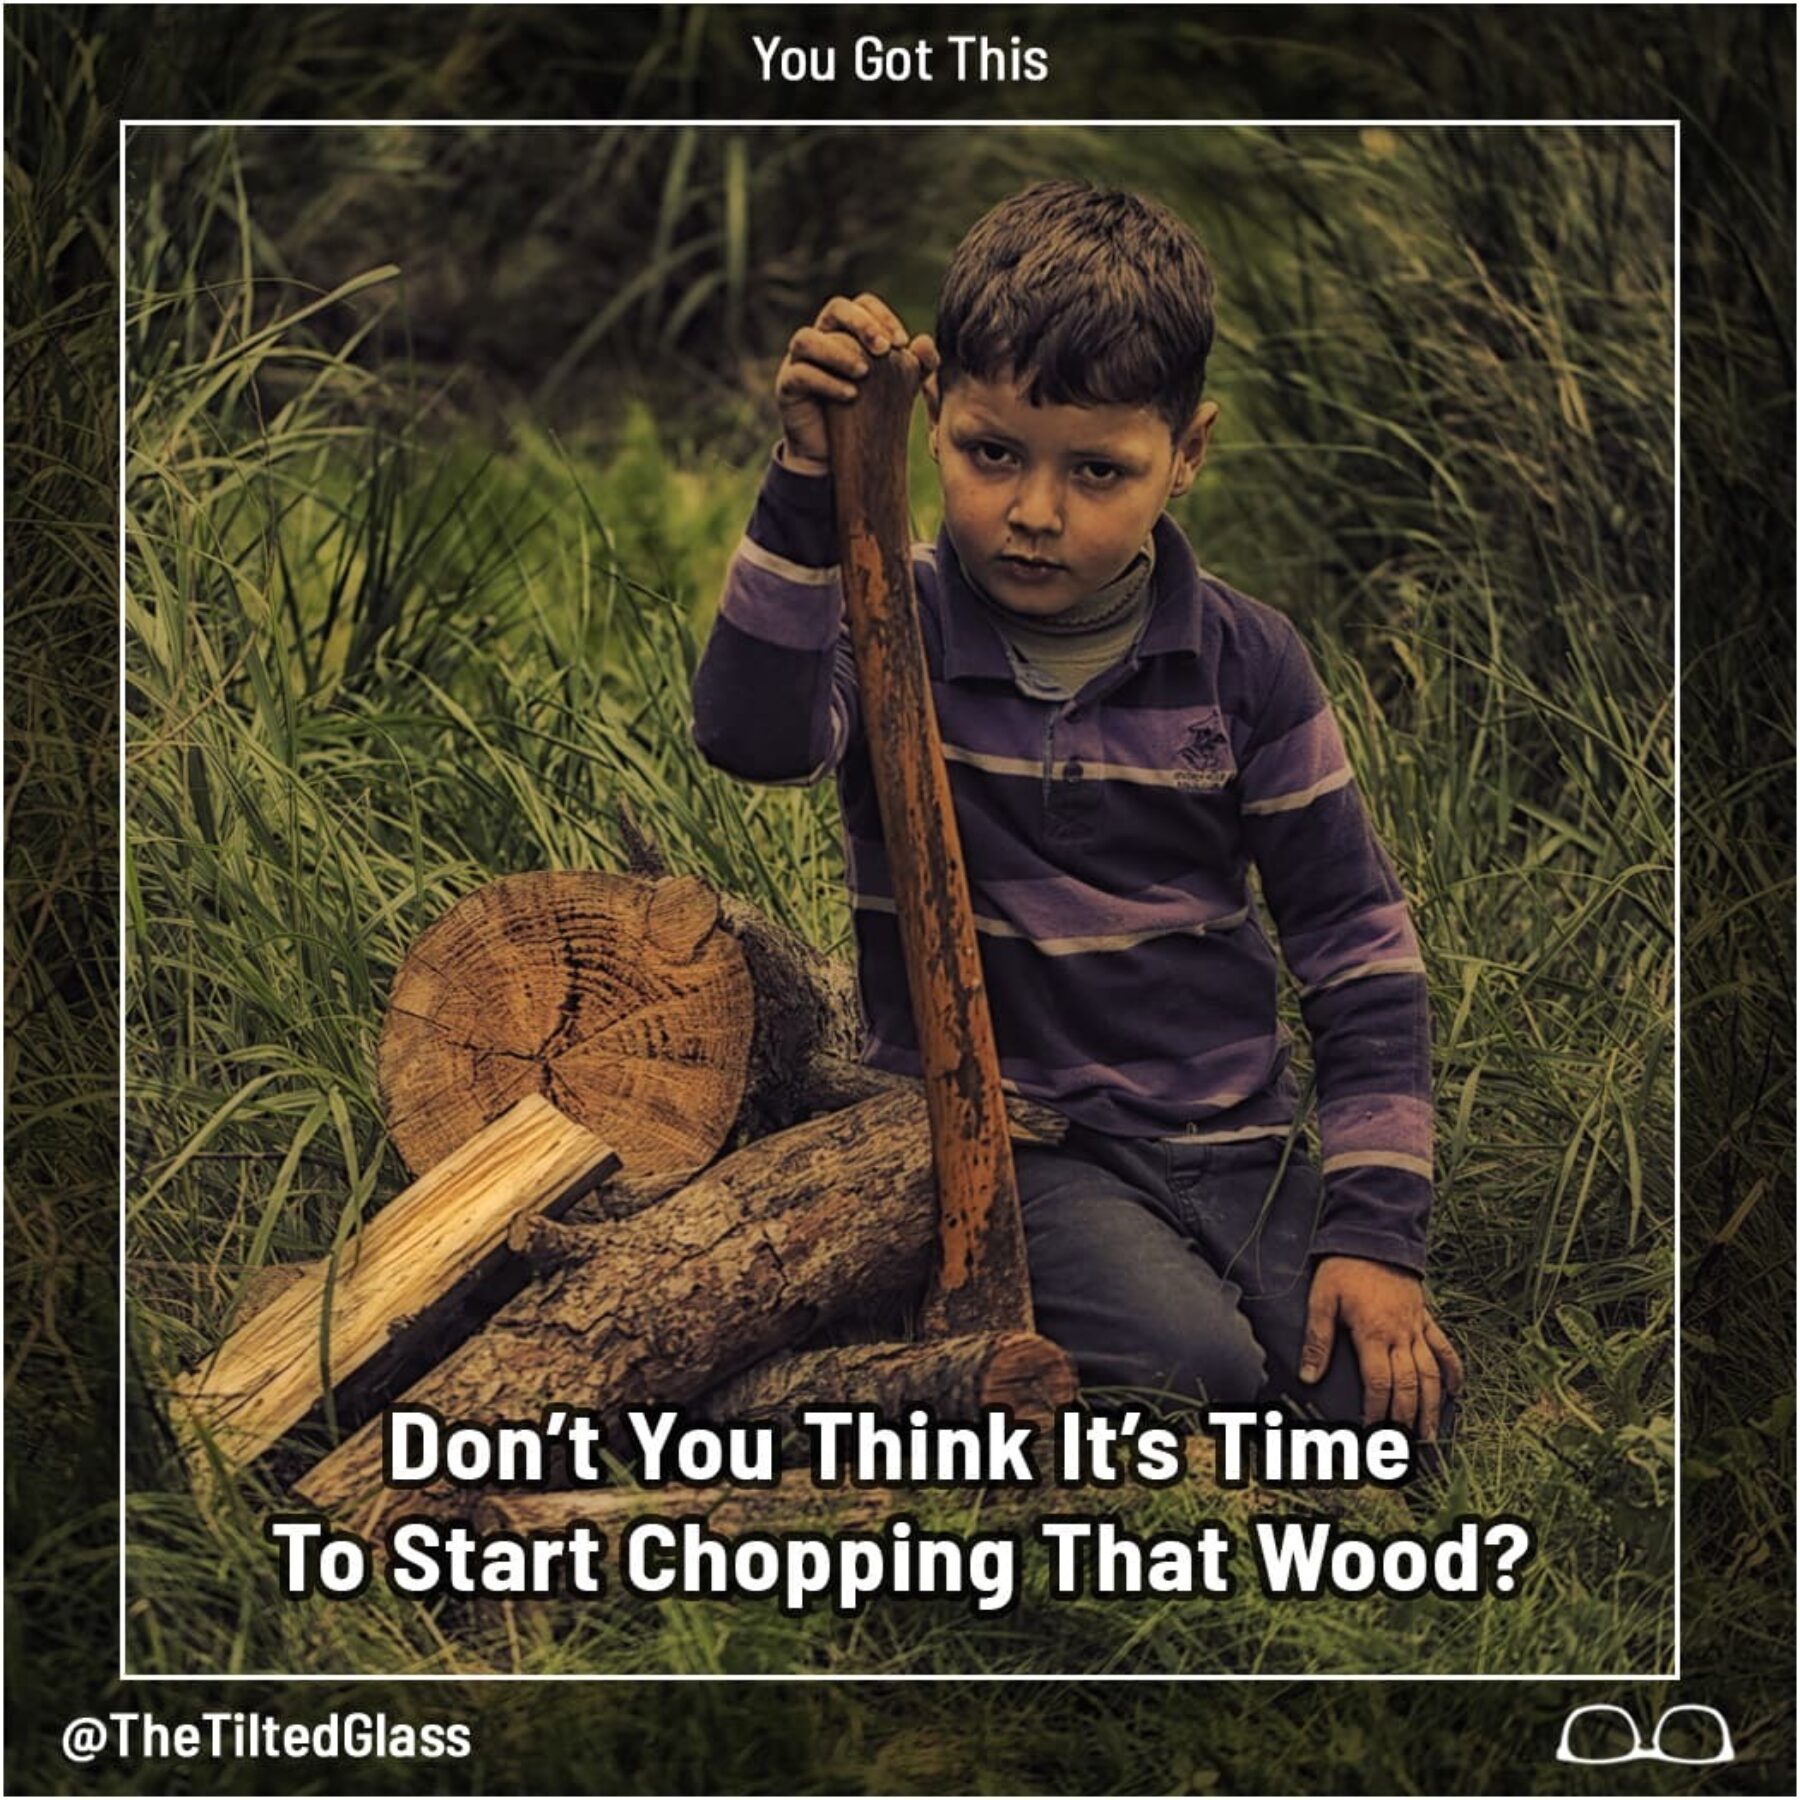 Don’t You Think It’s Time To Start Chopping That Wood?